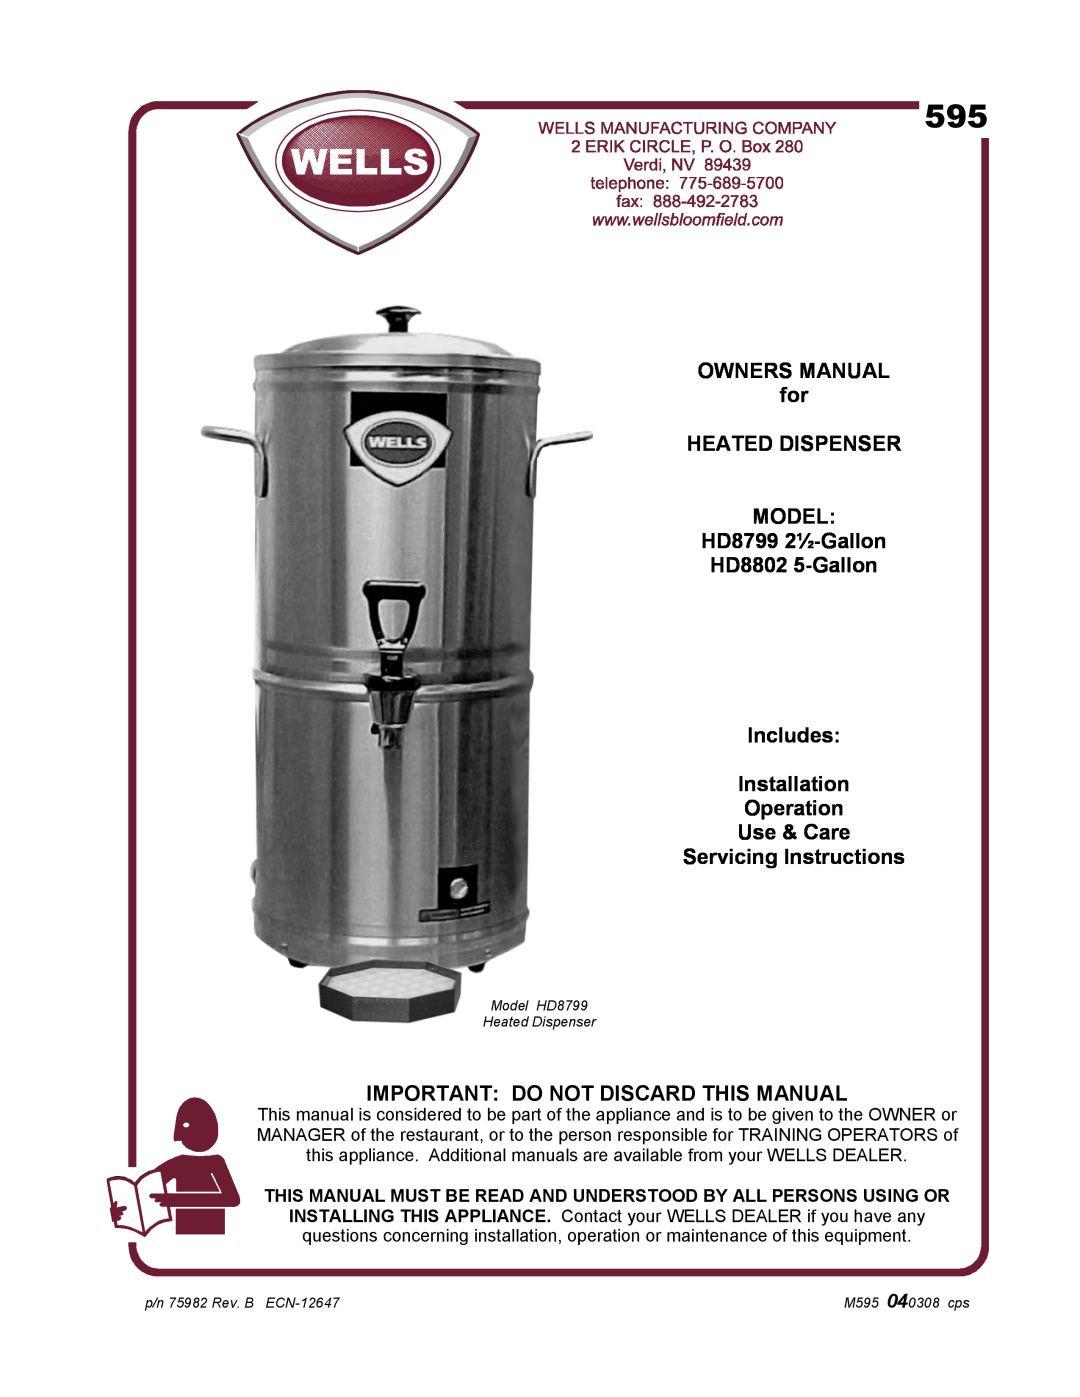 Bloomfield HD8799 owner manual HD8802 5-Gallon Includes Installation Operation Use & Care, Servicing Instructions 